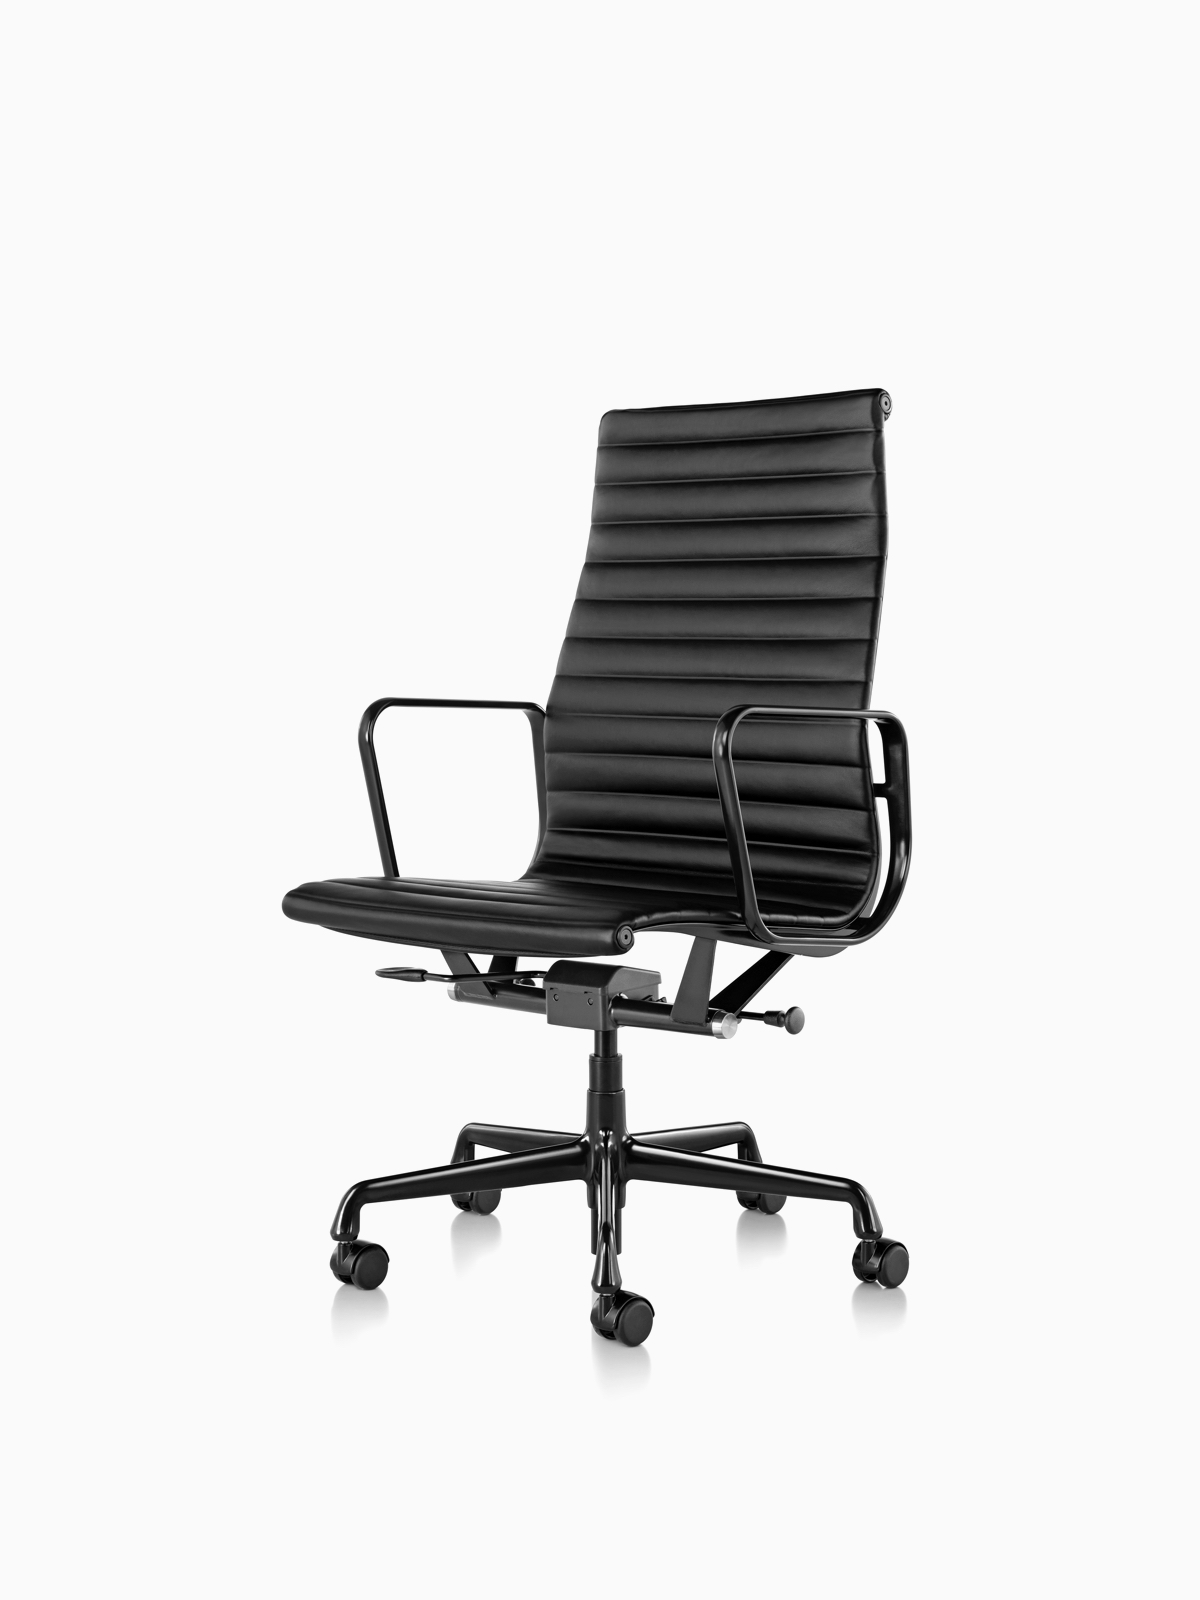 Eames Aluminum Group Office Chairs, Eames Leather Office Chair